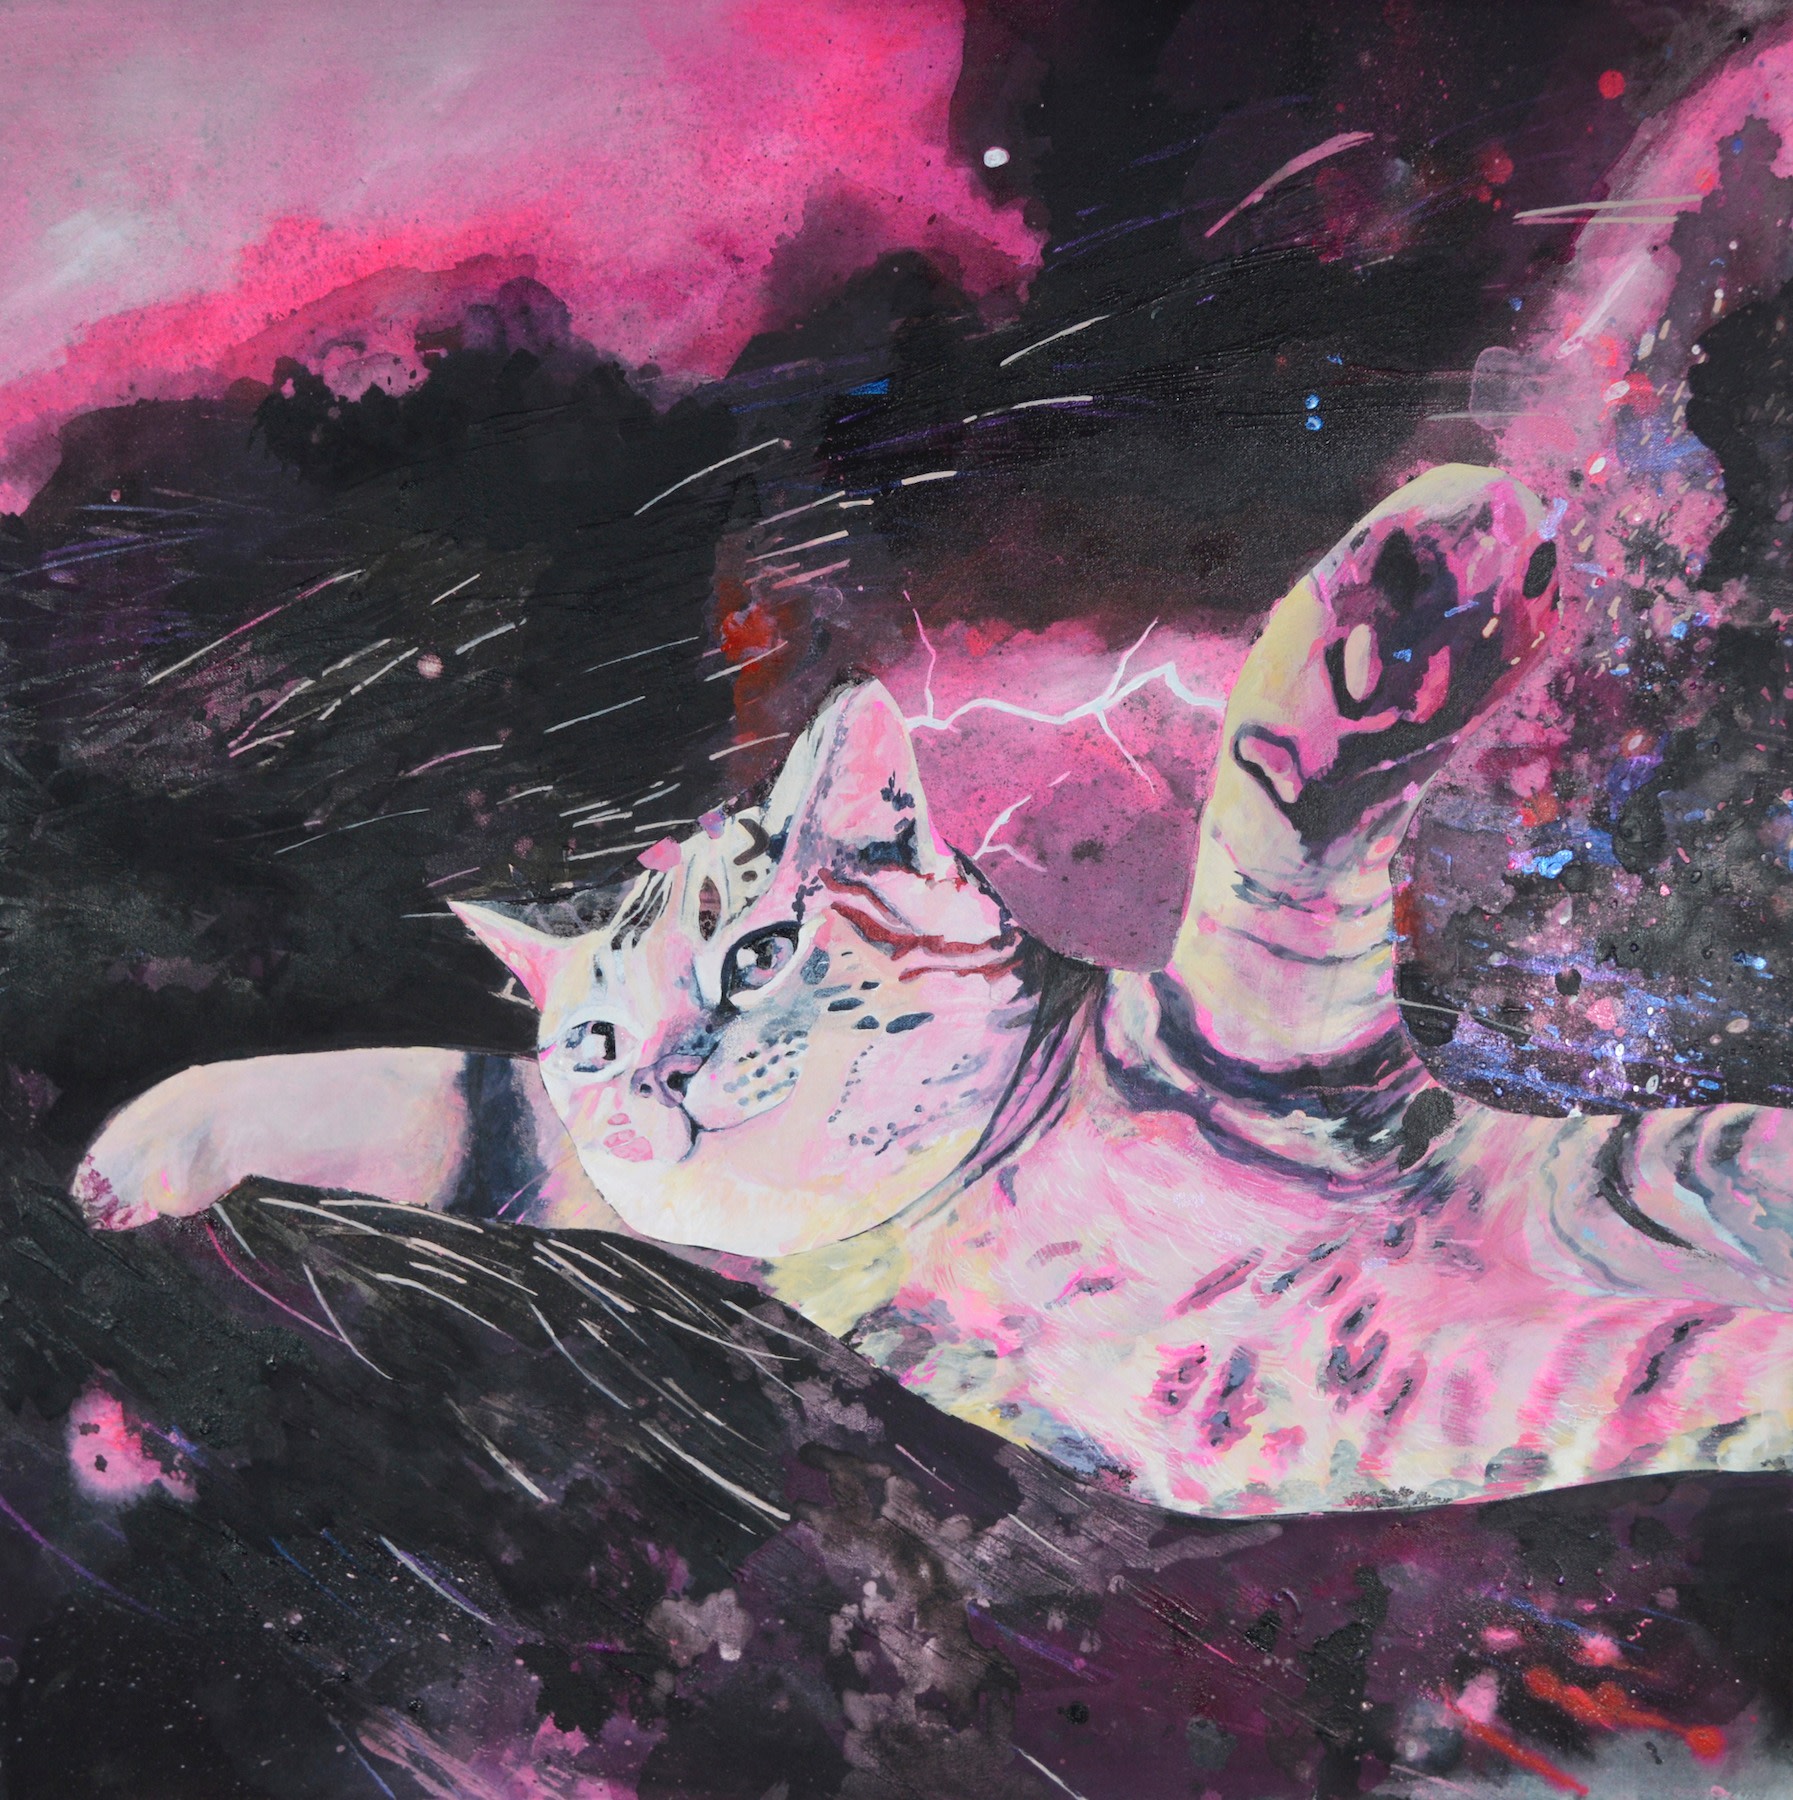 An acrylic painting of a cat in purple and pink hues gracefully flying with a backdrop of lightning in the sky.